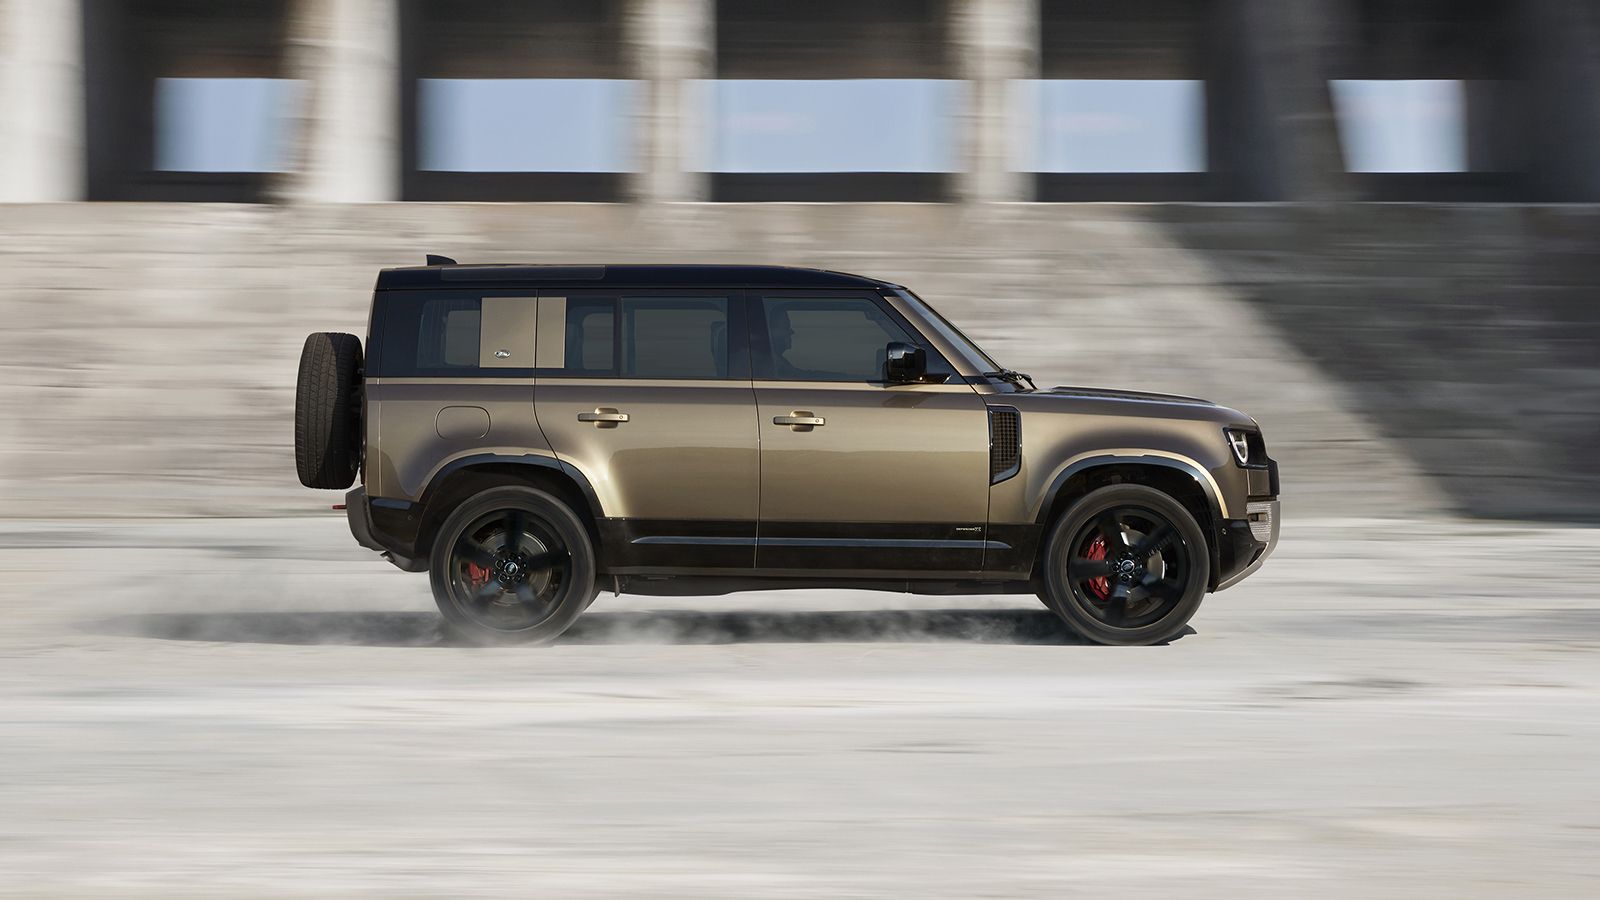 2020 Land Rover Defender: official photos, price, off-road ability